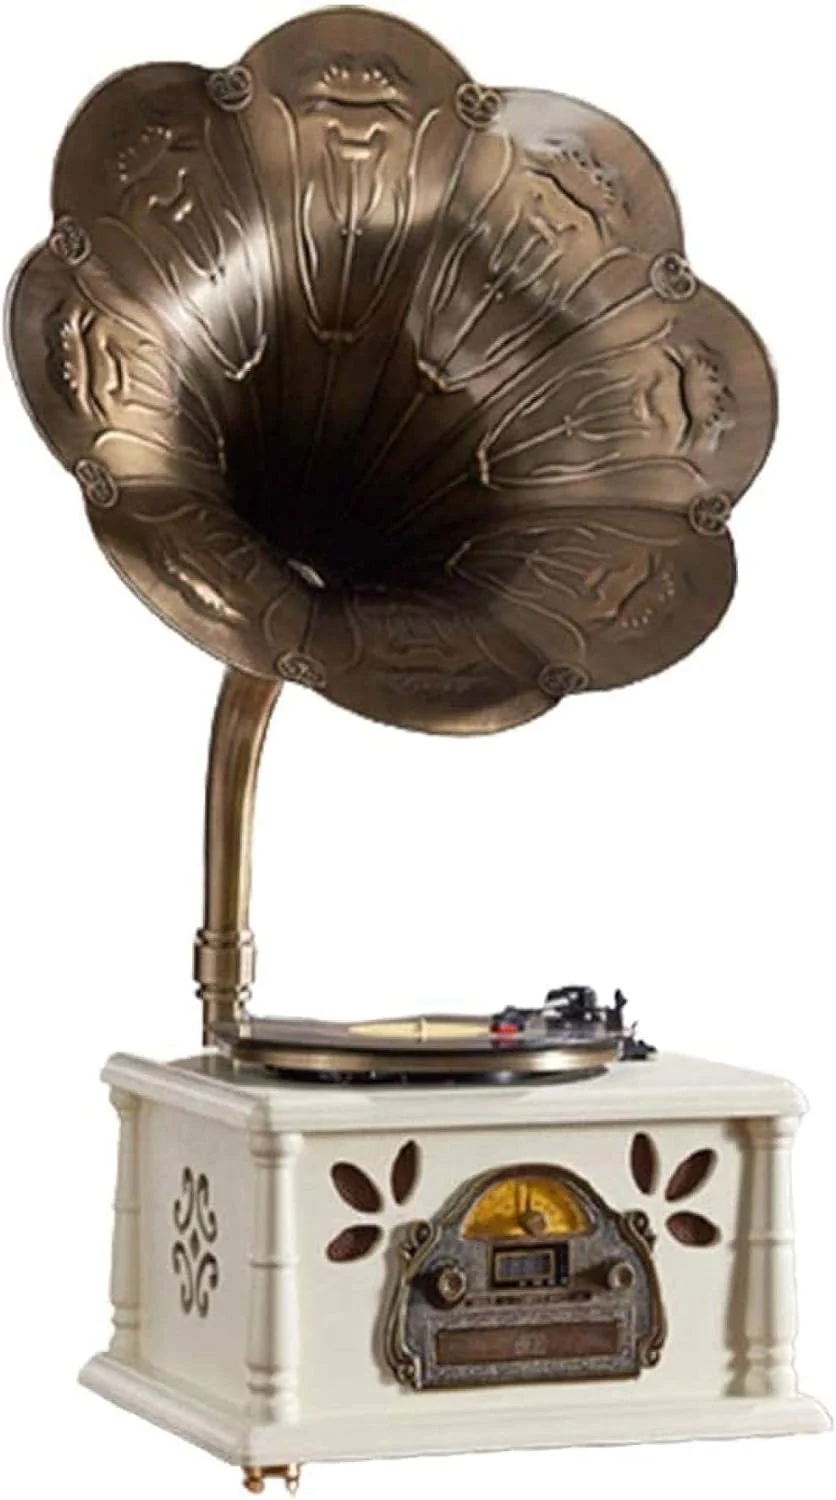 Gramophone Style Retro Record Player Review